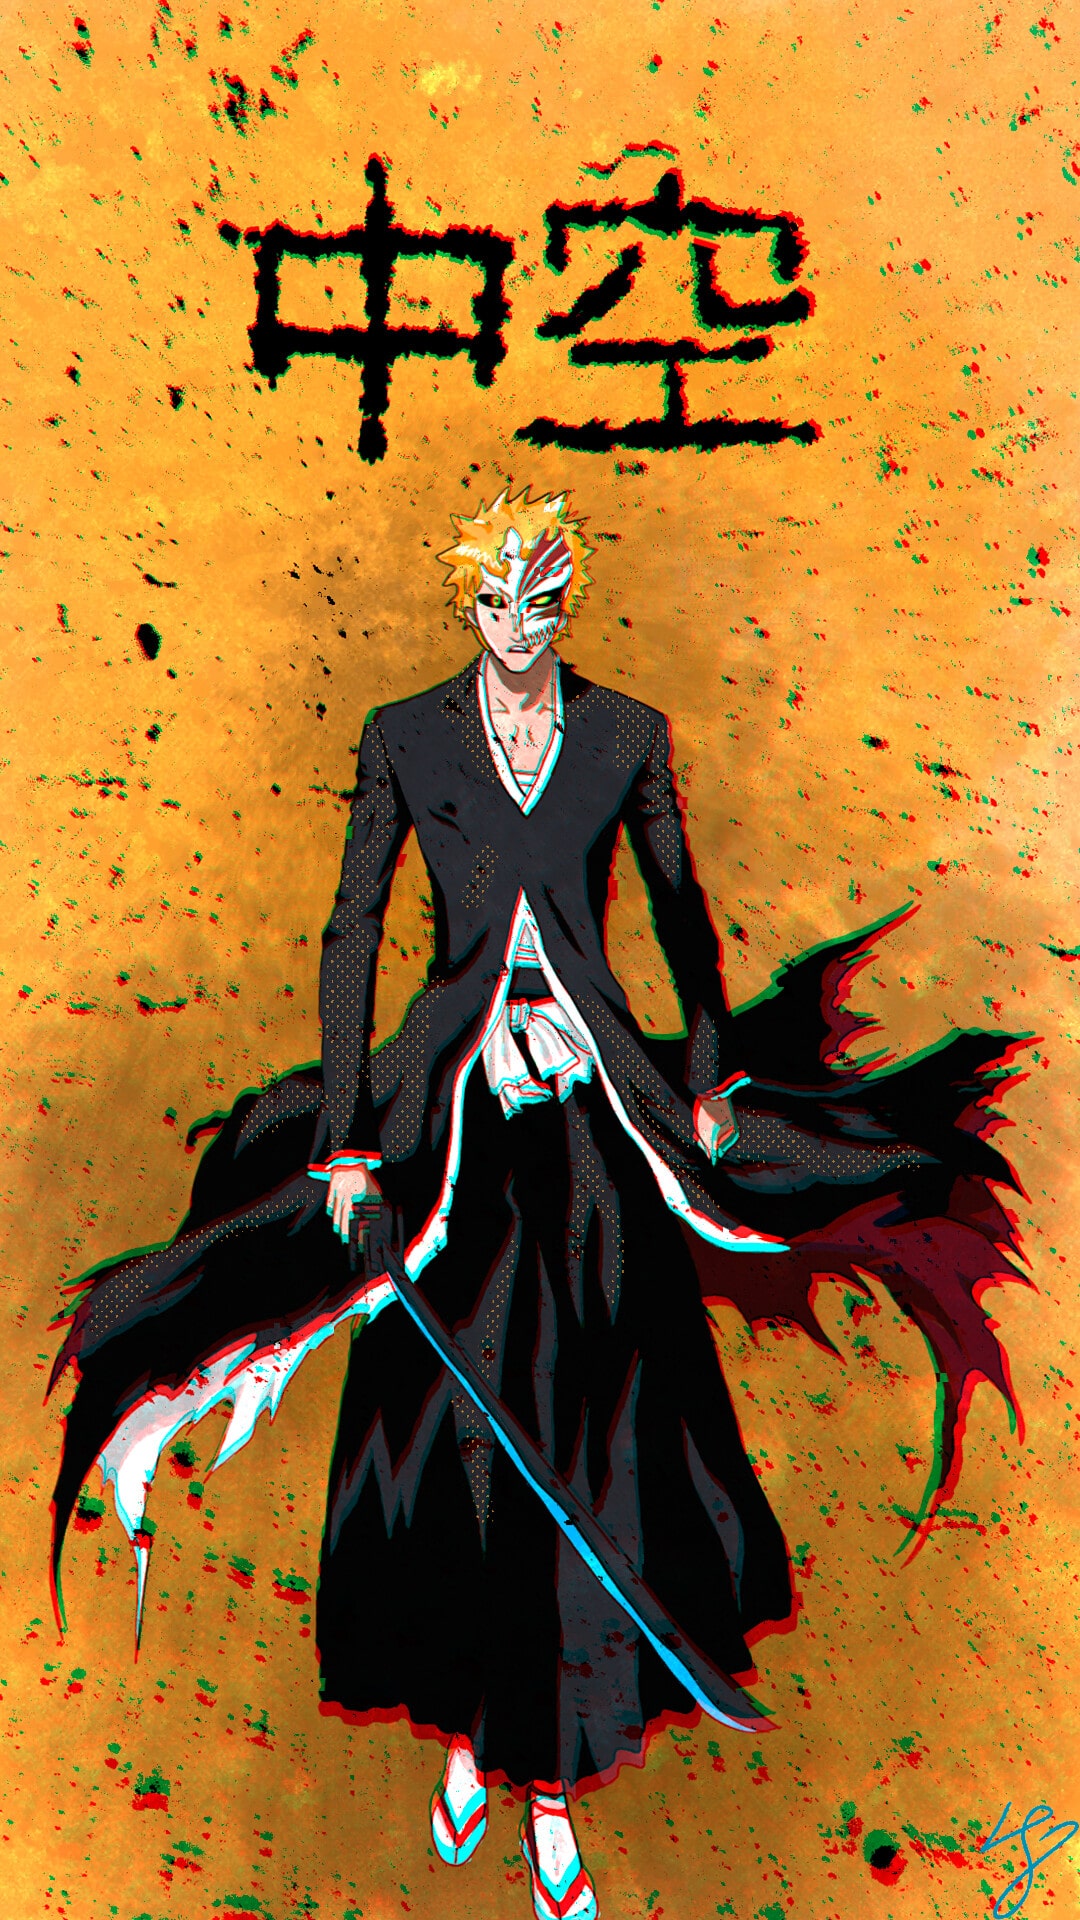 animegirl  on Twitter some 4K BLEACH wallpaper they took me a while to  make hope you enjoy feel free to use   BleachTYBW anime Anitwt BLEACHアニメベスト投票  thousandyearbloodwar httpstcoT5Au3pQQgx  Twitter